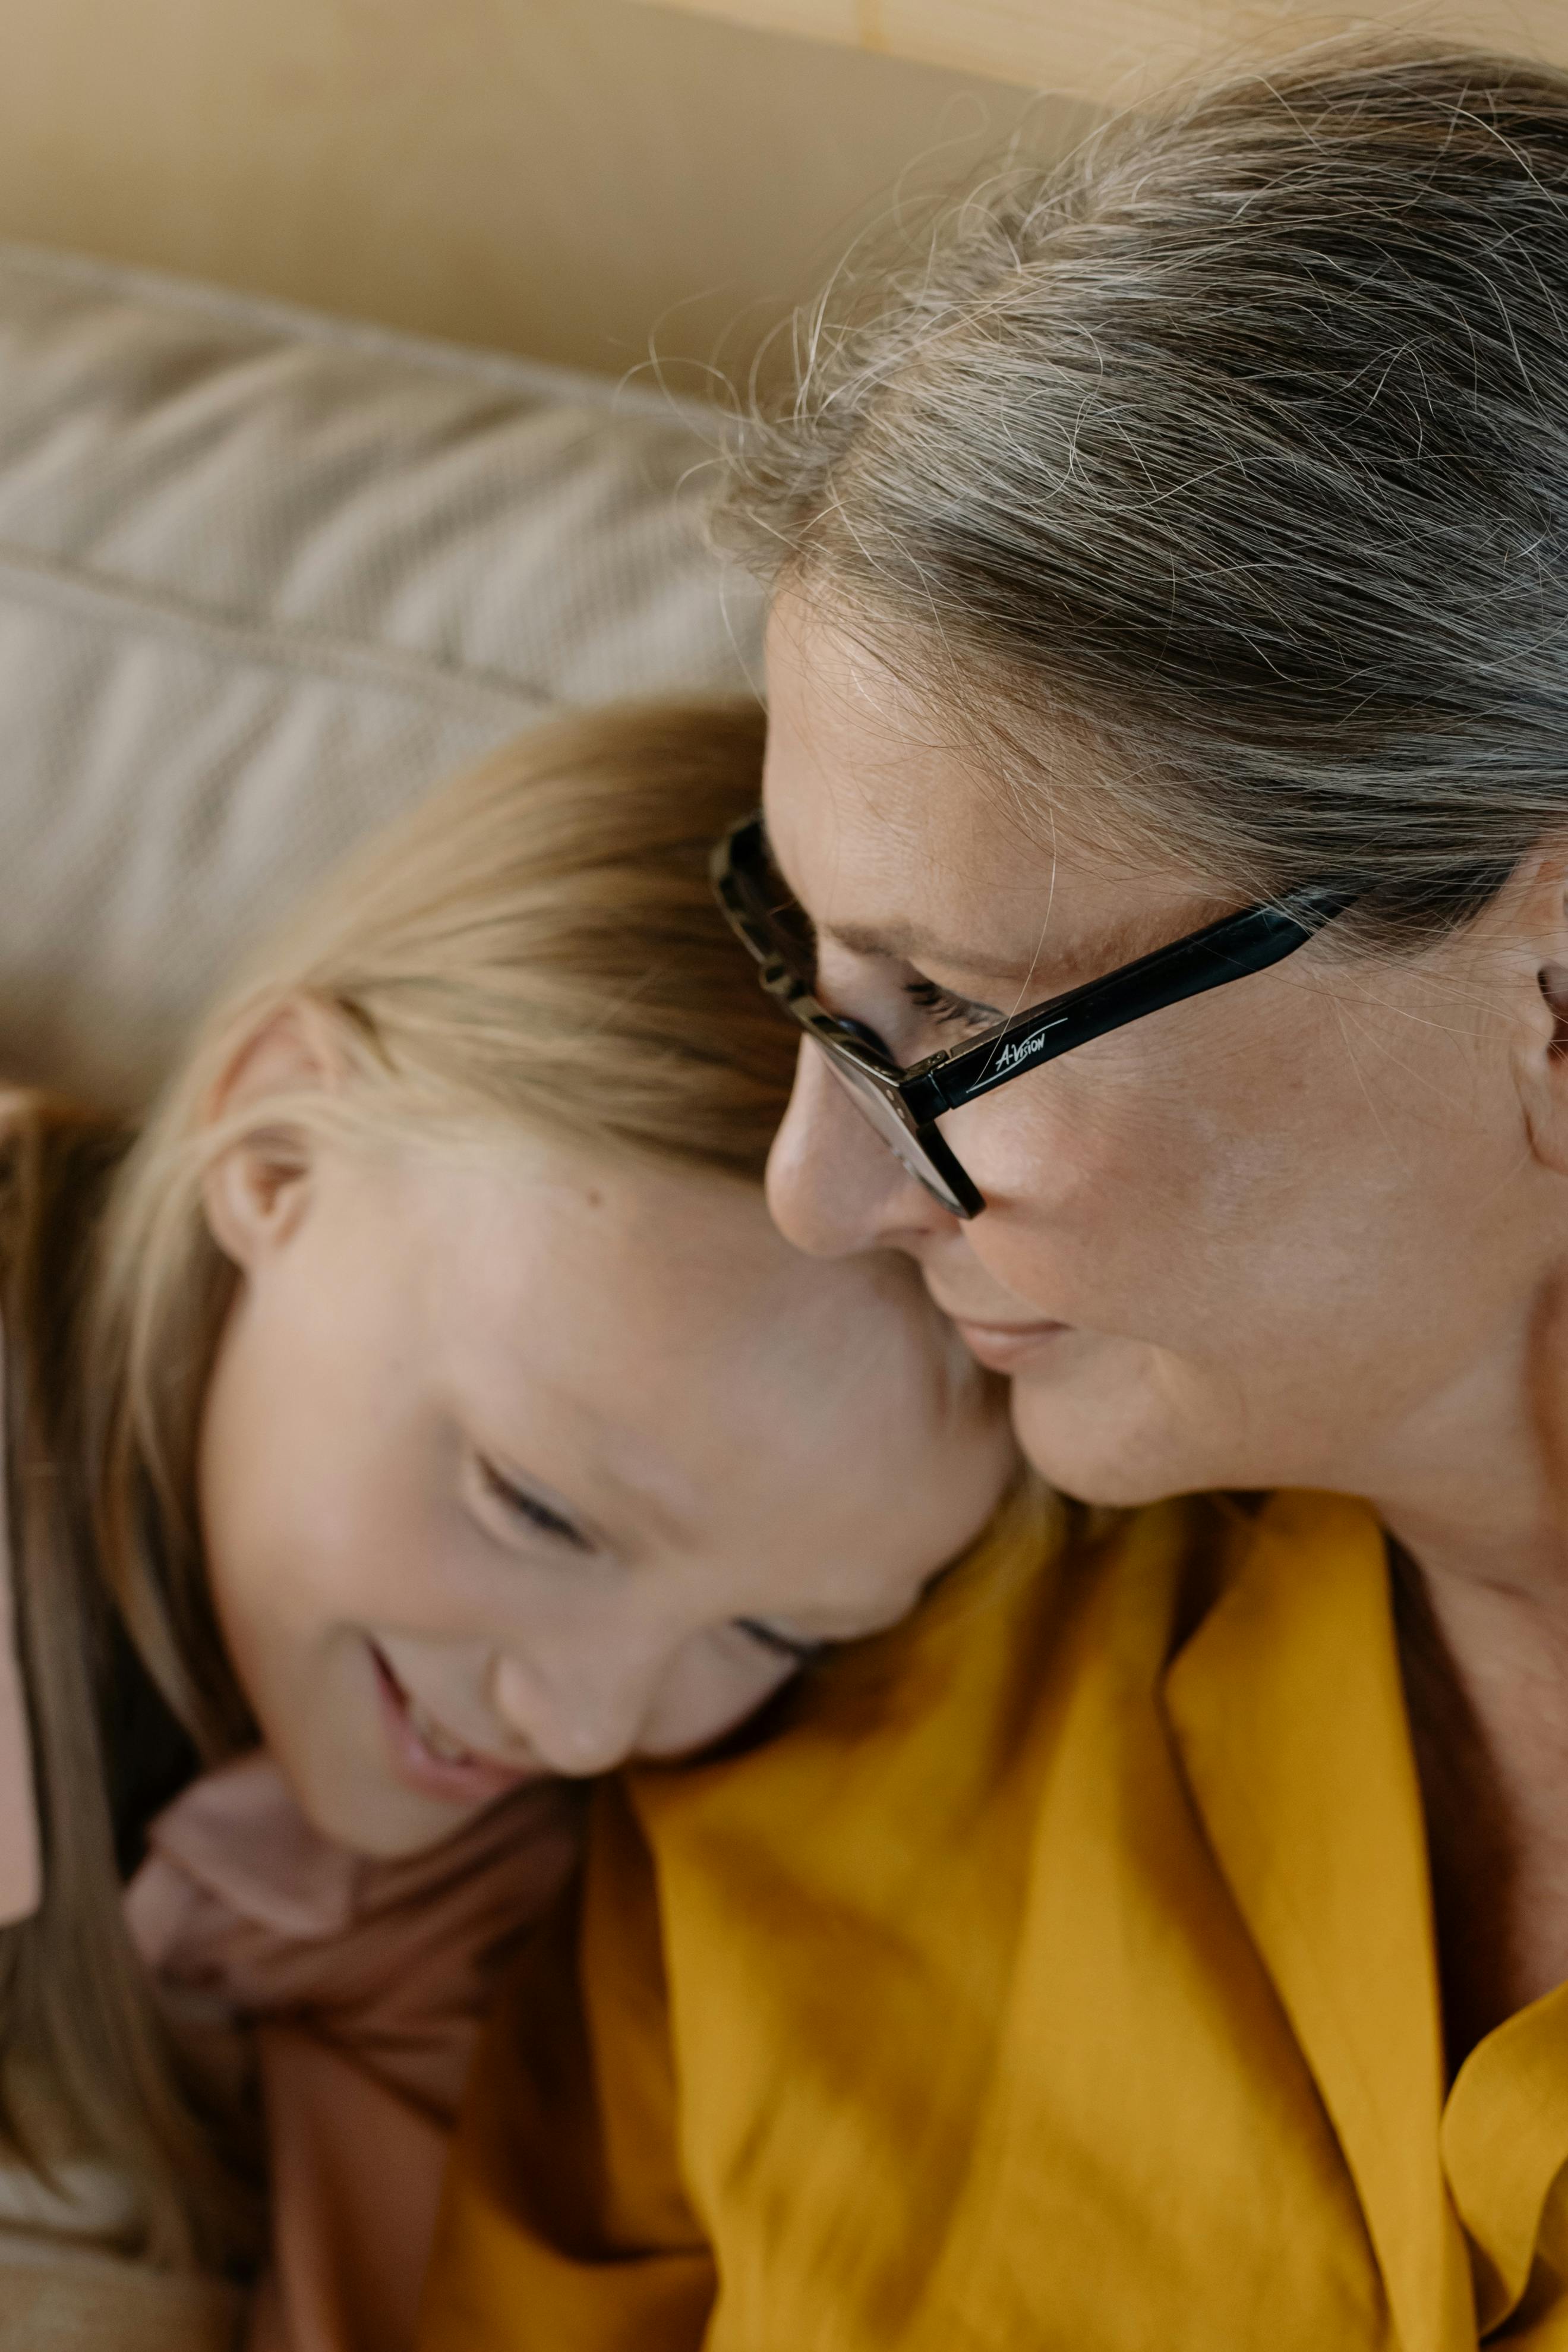 A grandmother bonding with her granddaughter | Source: Pexels